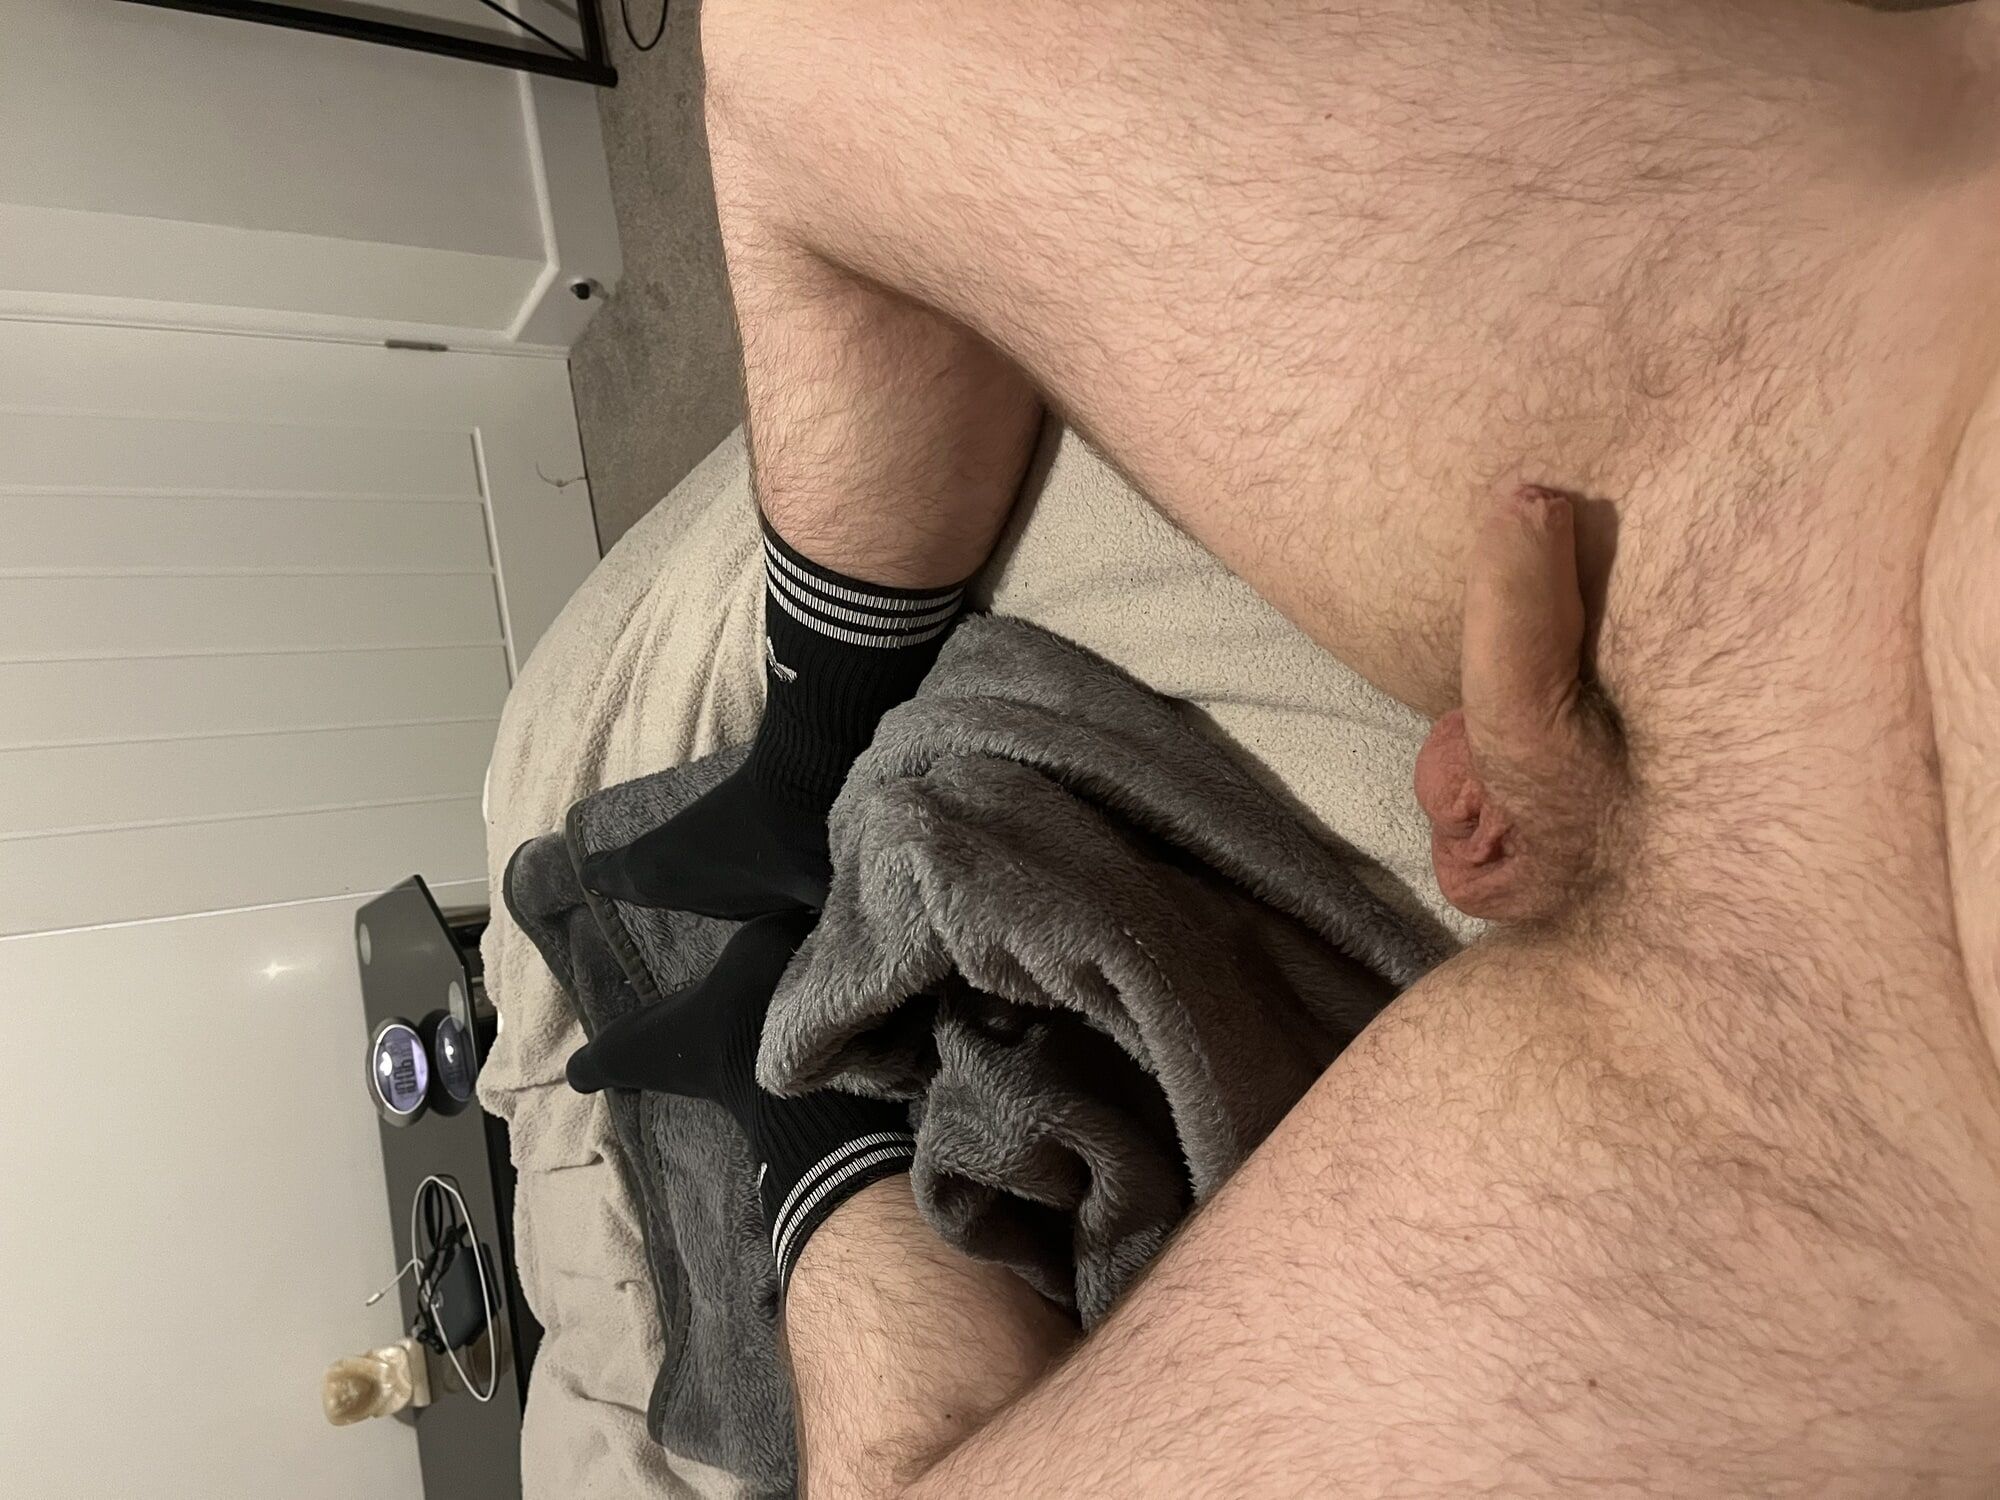 My tiny dick for humiliation 